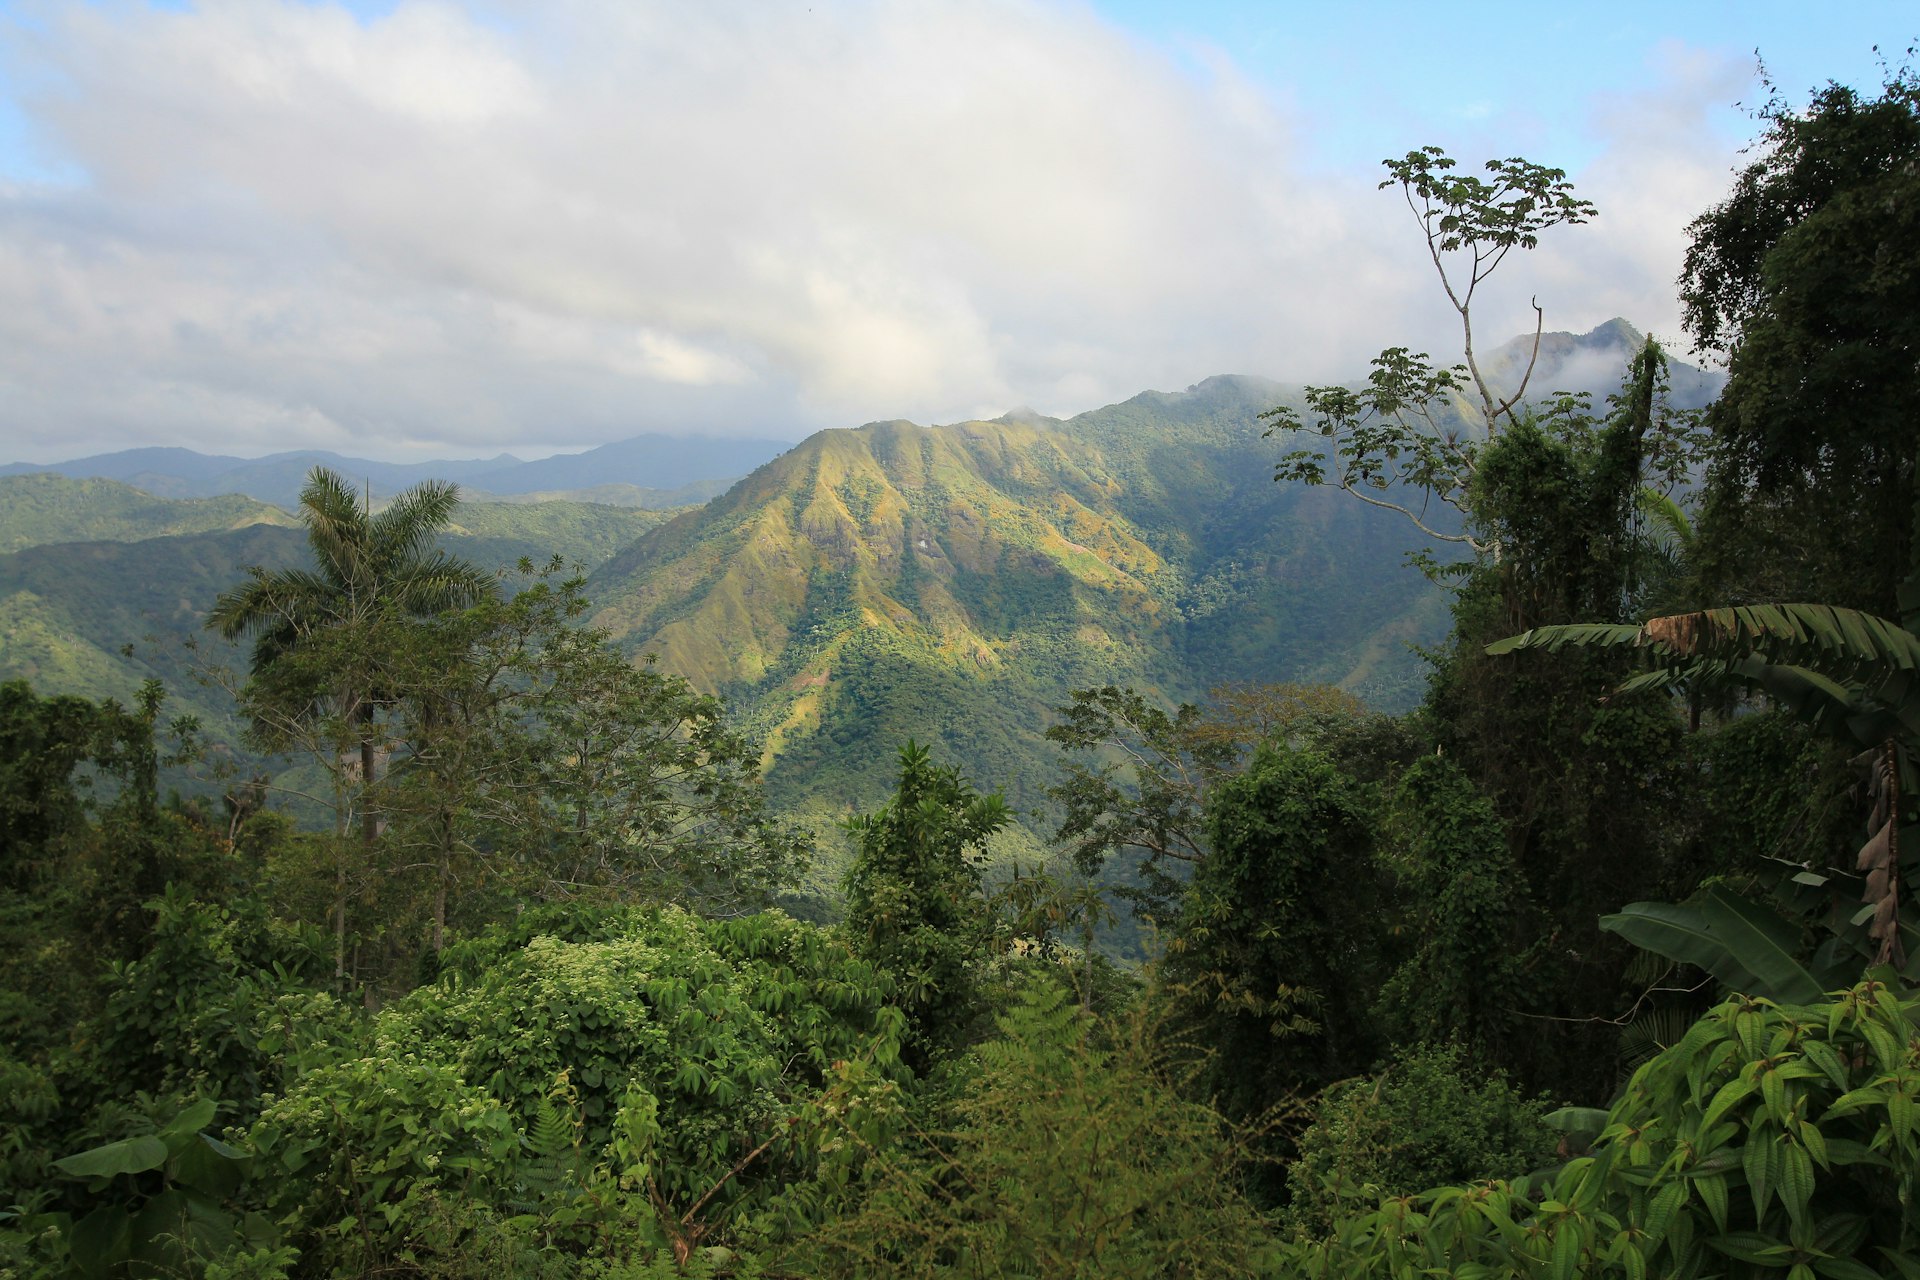 Lush mountains and forest seen from a distance in Parque Nacional Turquino